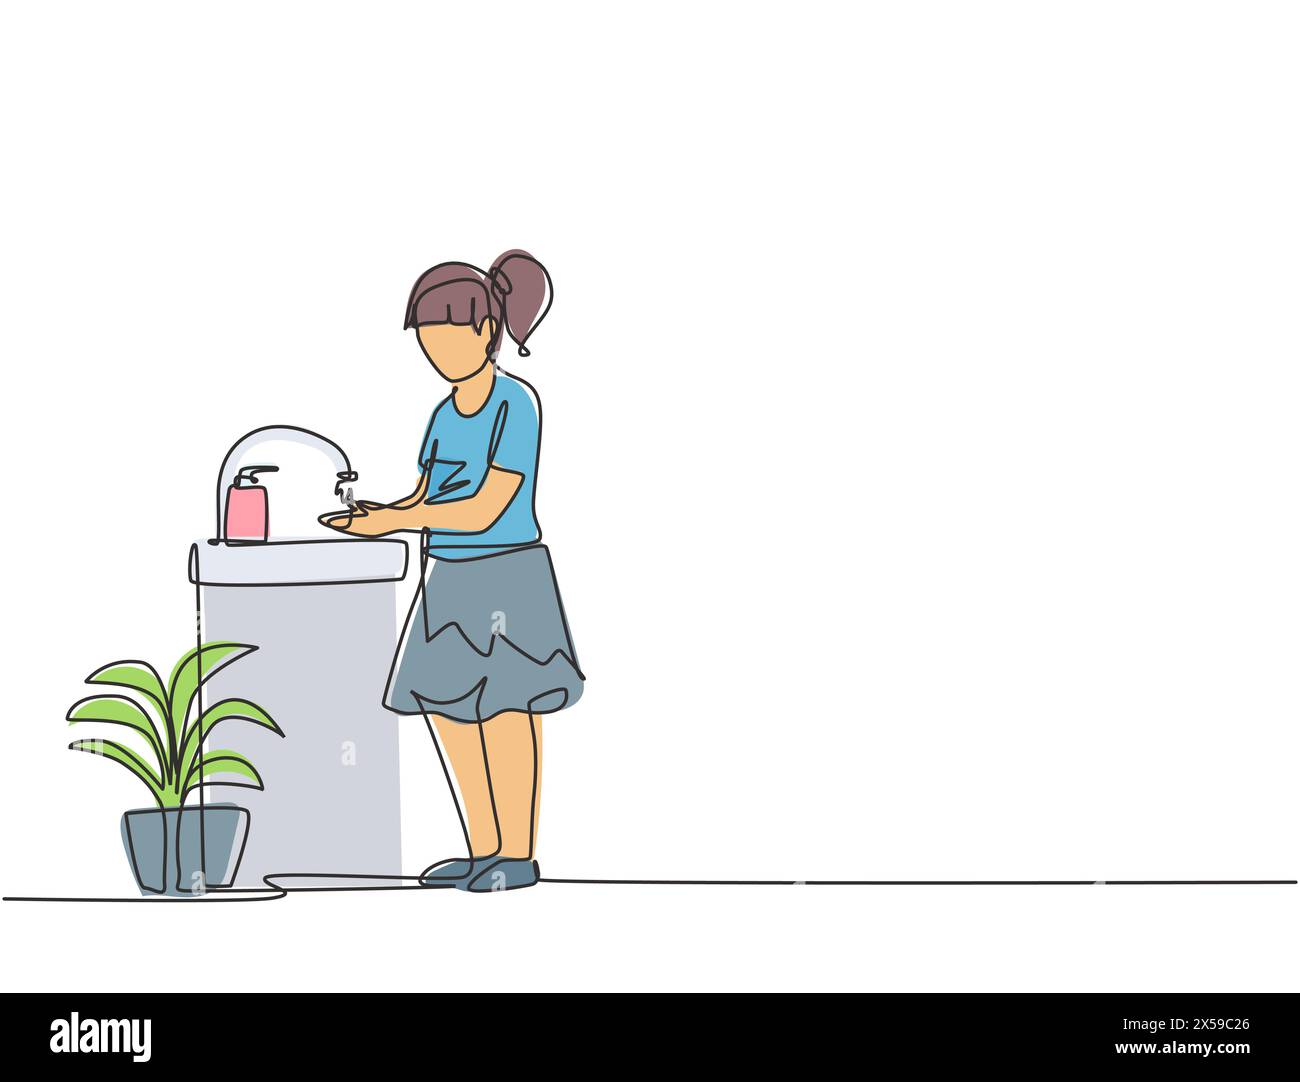 Single continuous line drawing a girl washes her hands in the sink, there is a soap dish by the tap and there is a pot of plants under the sink. One l Stock Vector